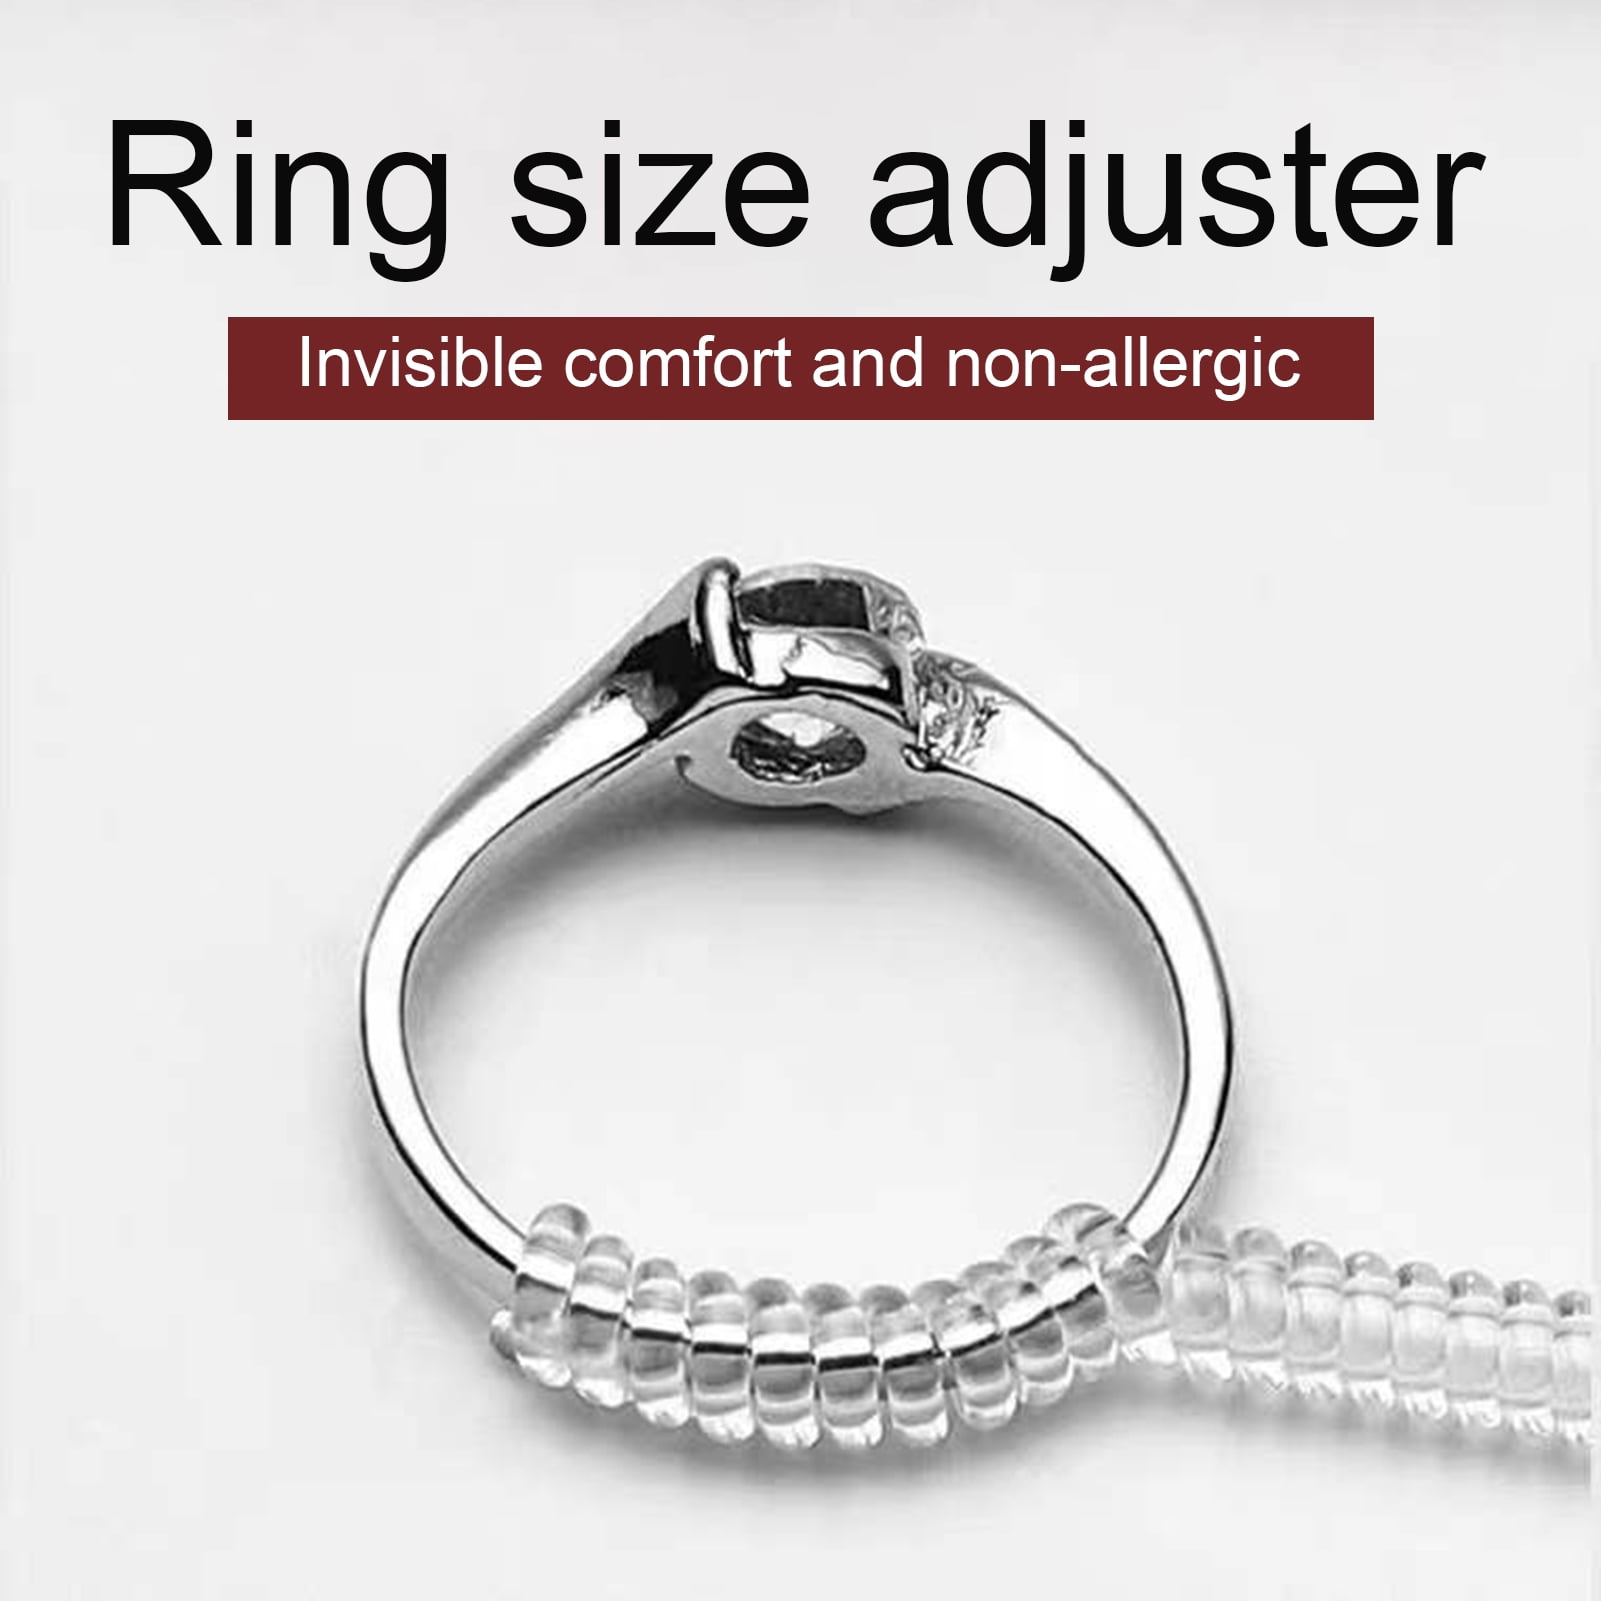 Aggregate more than 161 silicone ring size adjuster best -  awesomeenglish.edu.vn